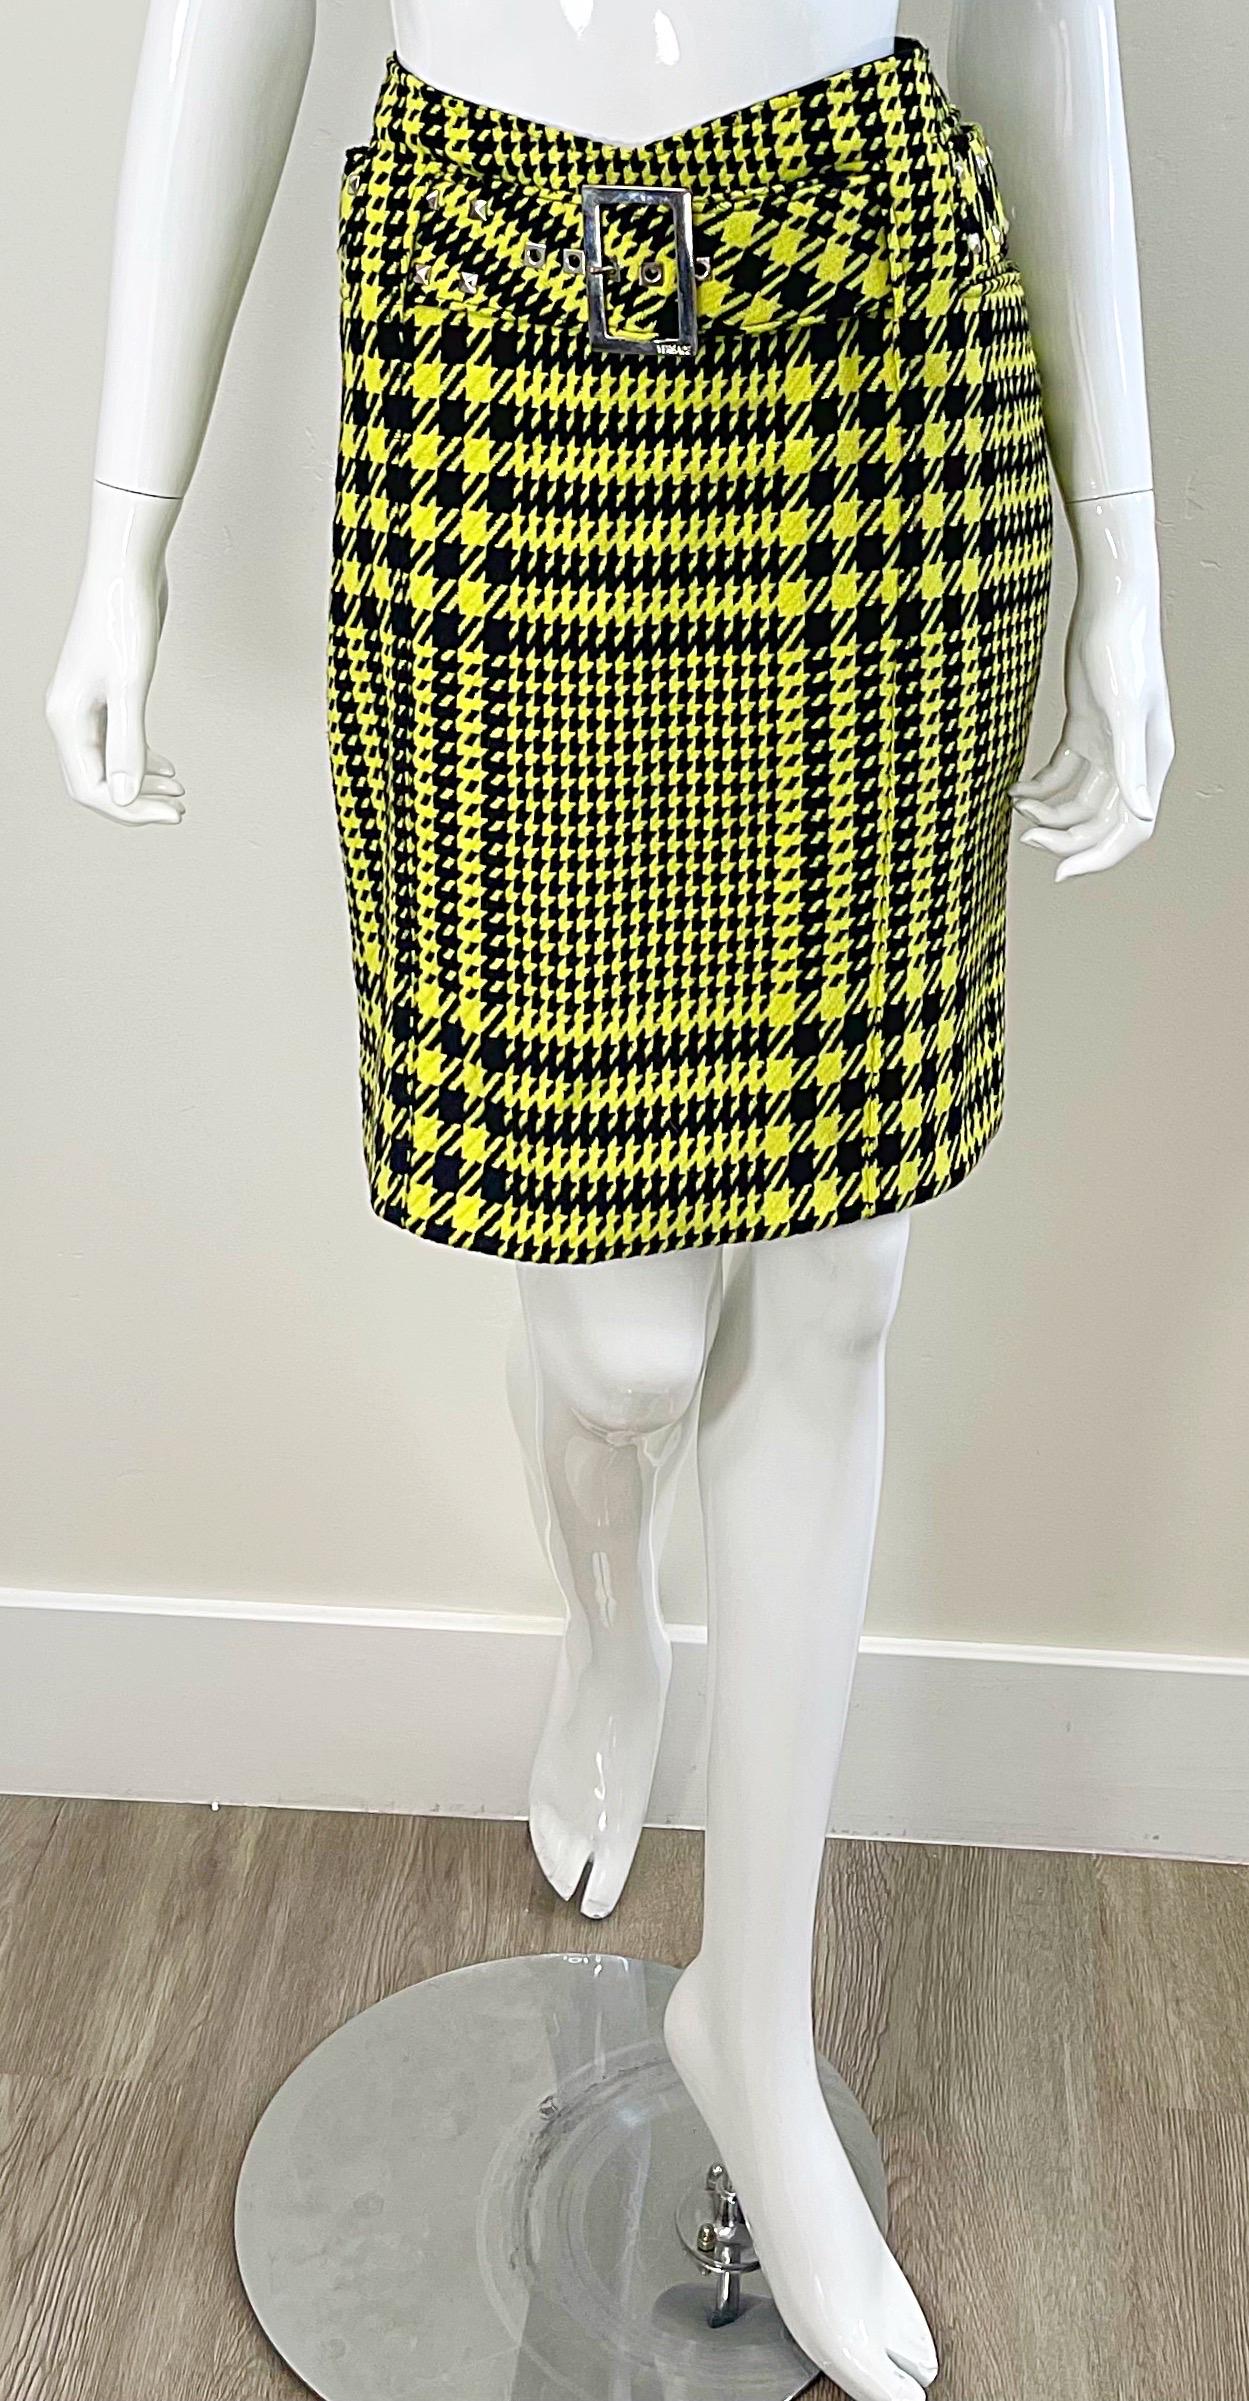 Gianni Versace Fall 2004 Runway Size 8 Yellow Black Houndstooth Belted Skirt In Excellent Condition For Sale In San Diego, CA